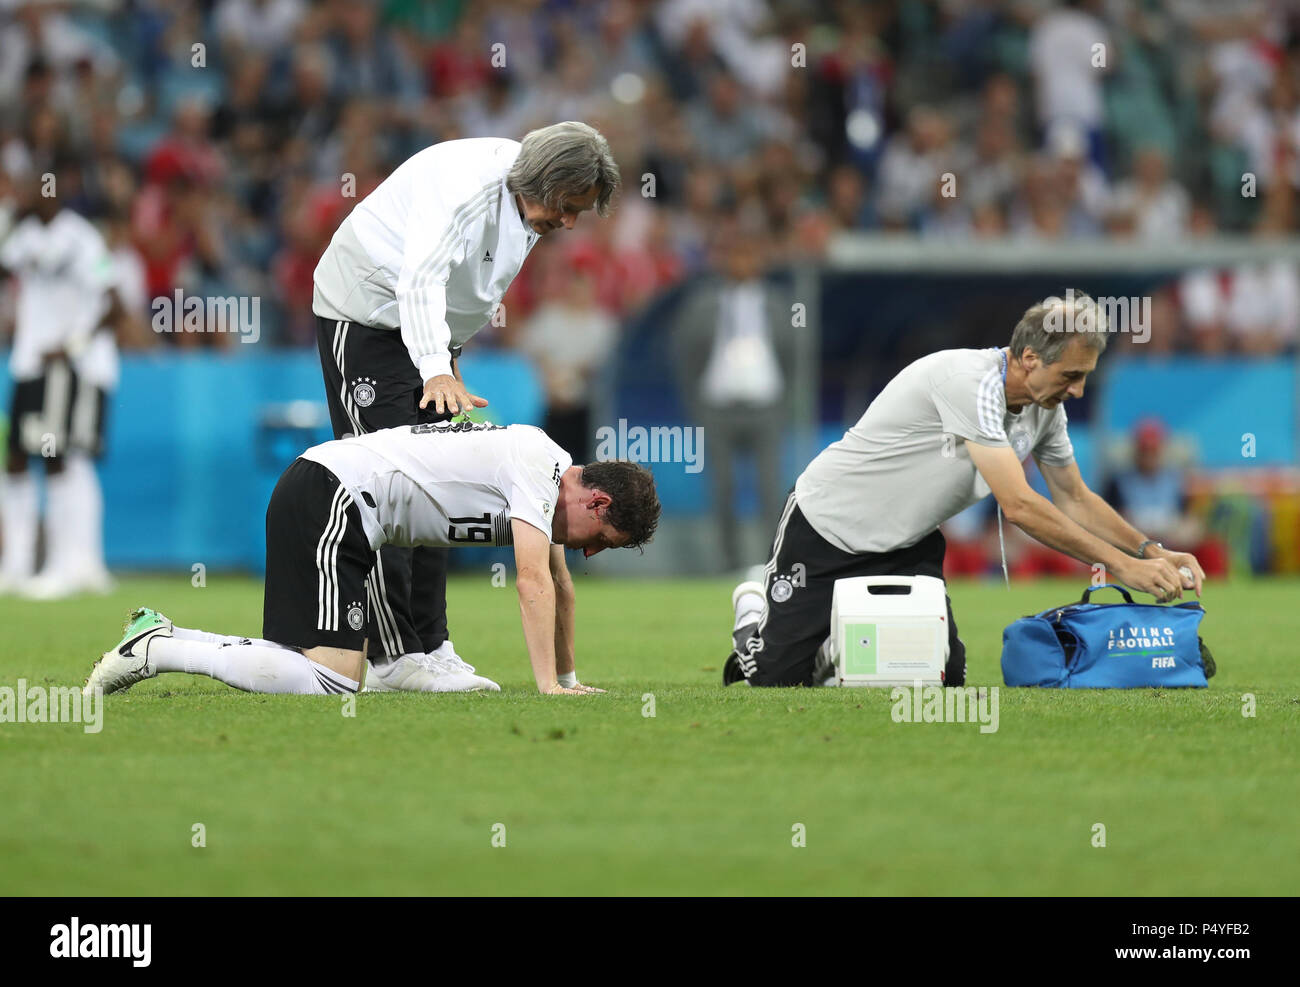 Sochi, Russia. 23rd June, 2018. Sebastian Rudy (L bottom) of Germany receives medical treatment after his injury during the 2018 FIFA World Cup Group F match between Germany and Sweden in Sochi, Russia, June 23, 2018. Credit: Lu Jinbo/Xinhua/Alamy Live News Stock Photo